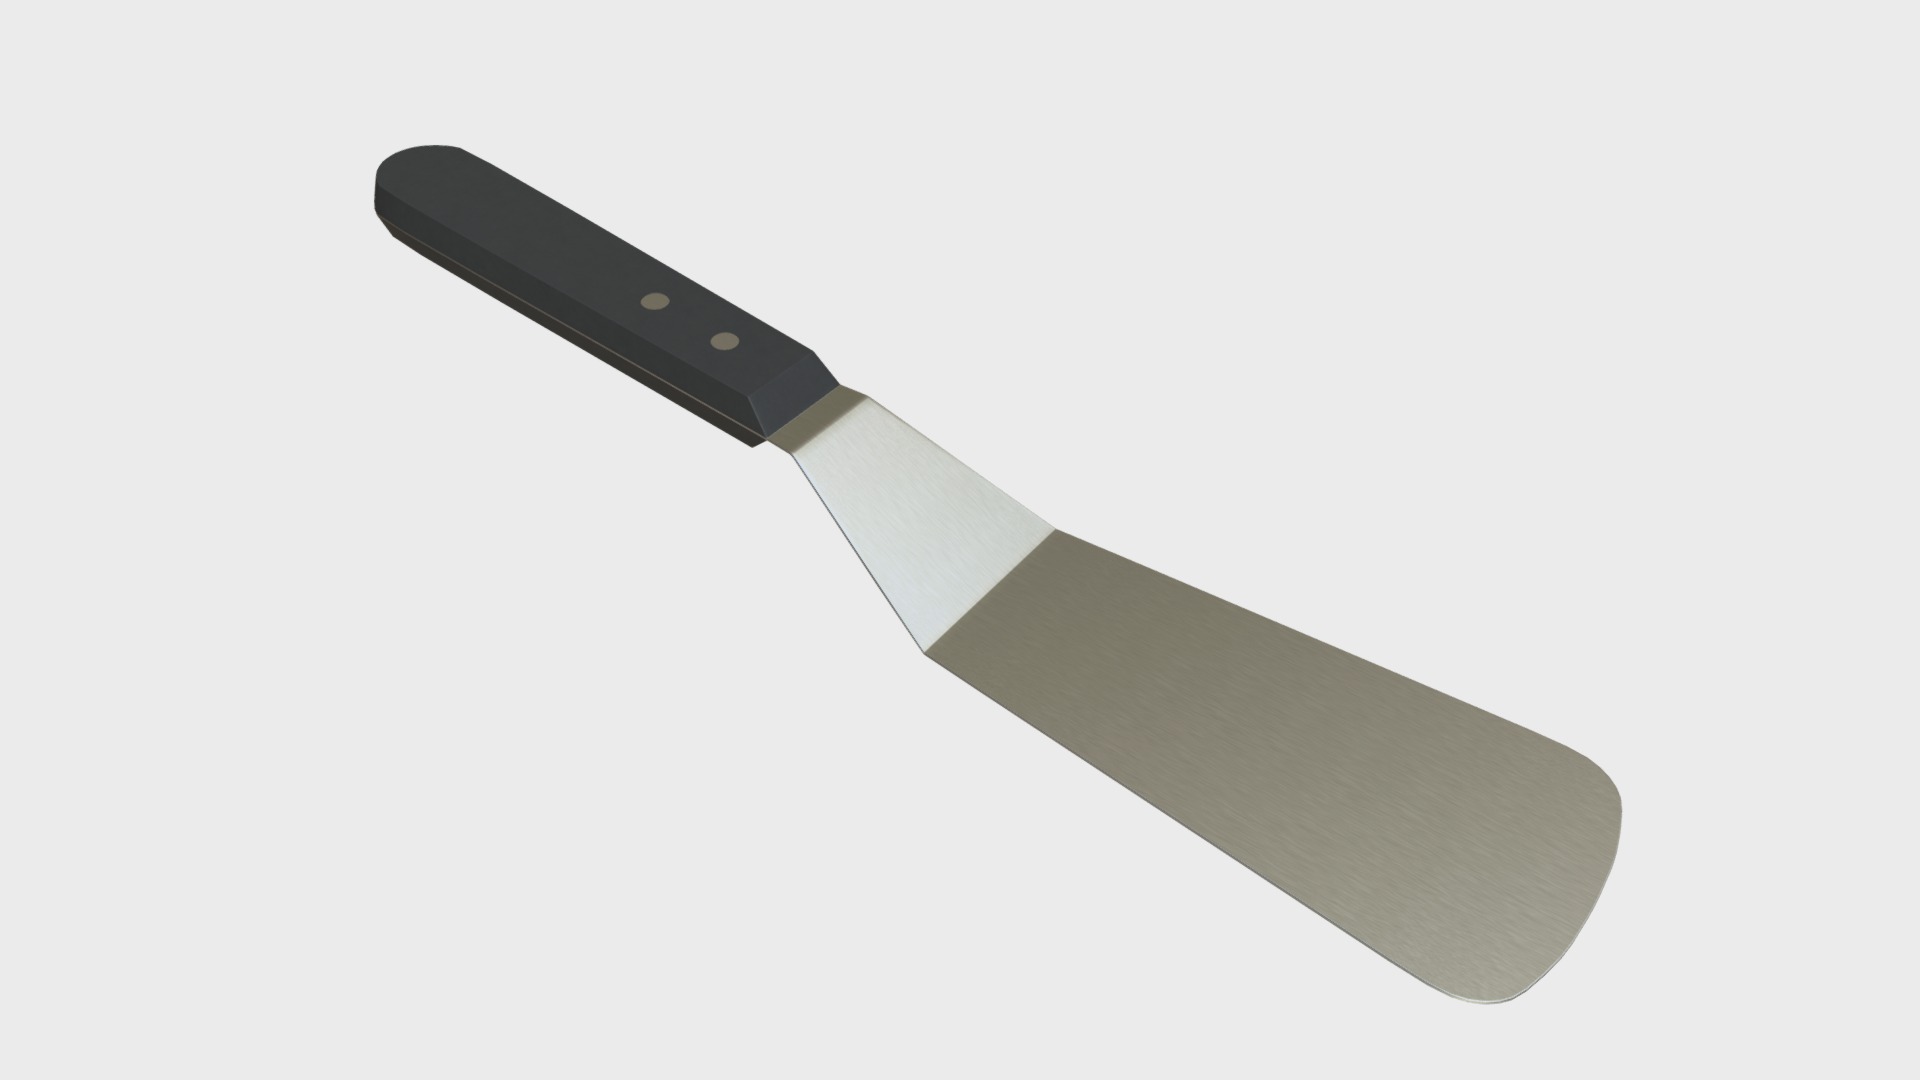 3D model Small kitchen spatula - This is a 3D model of the Small kitchen spatula. The 3D model is about a knife with a handle.